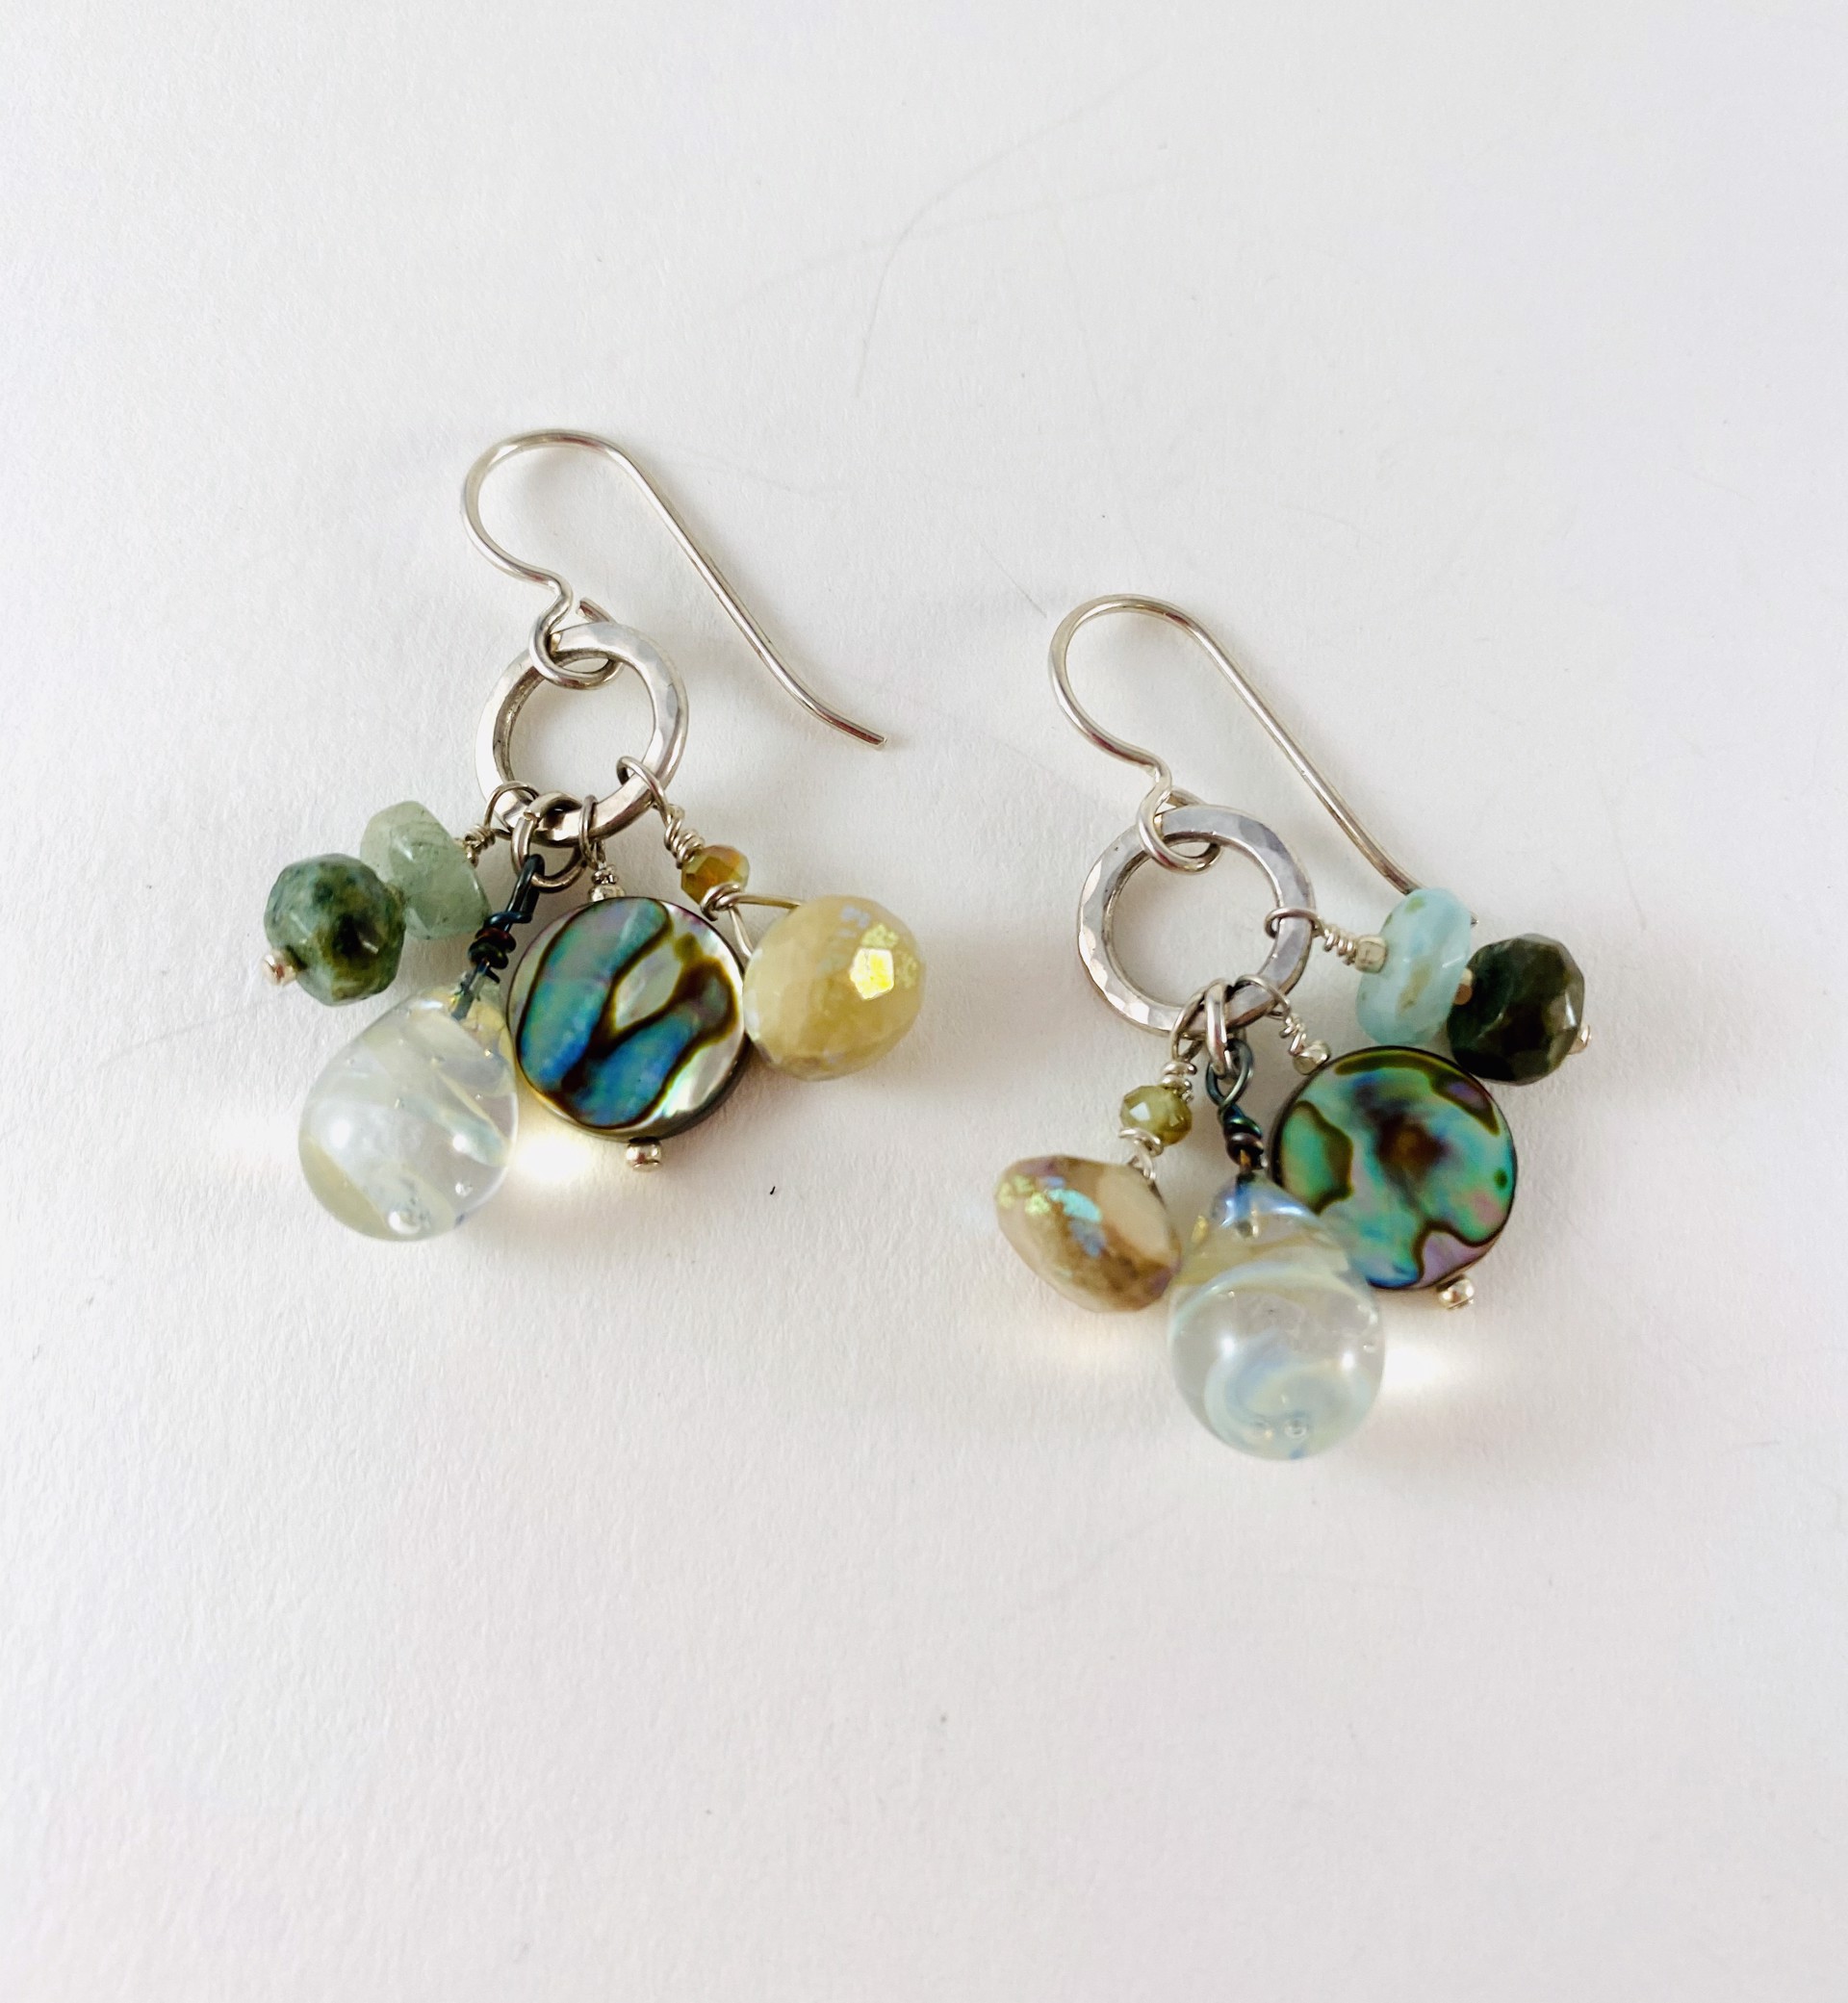 Glass Drop with Abalone and Faceted Gemstone Earrings #389 by Linda Sacra